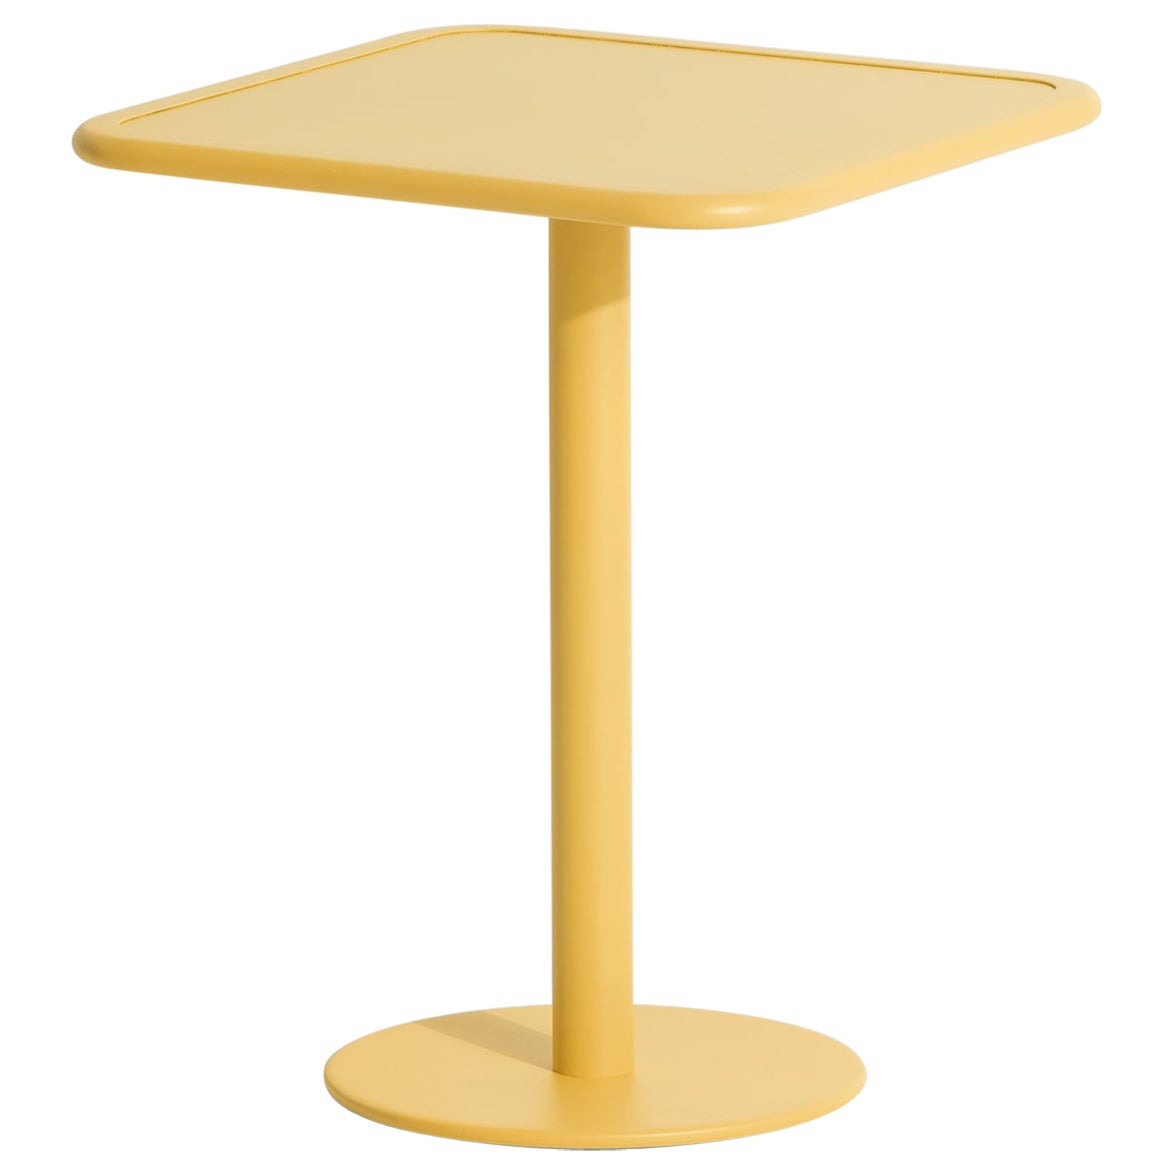 Petite Friture Week-End Bistro Square Dining Table in Saffron Aluminium, 2017 For Sale